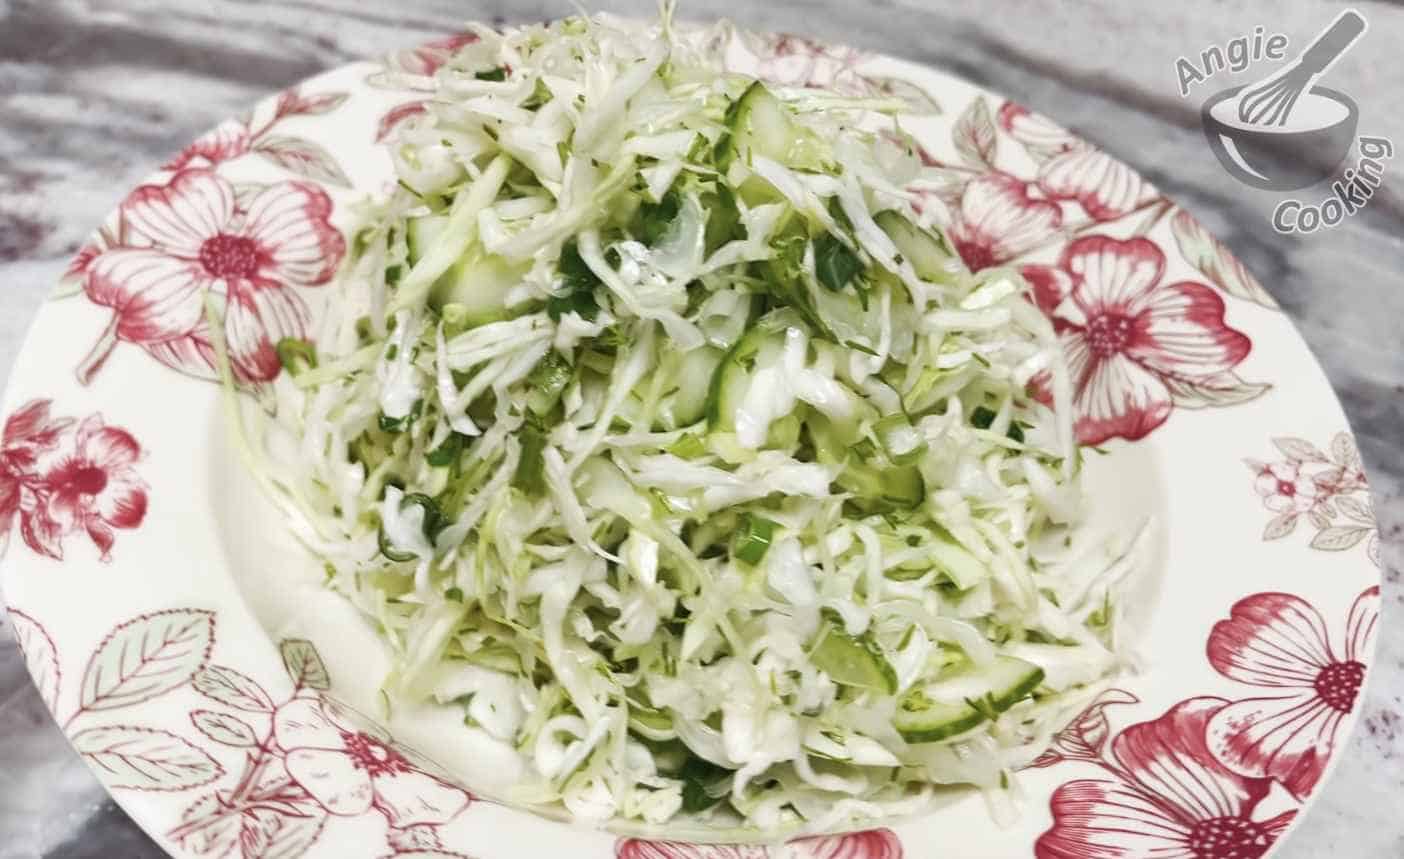 Cucumber and Cabbage Salad